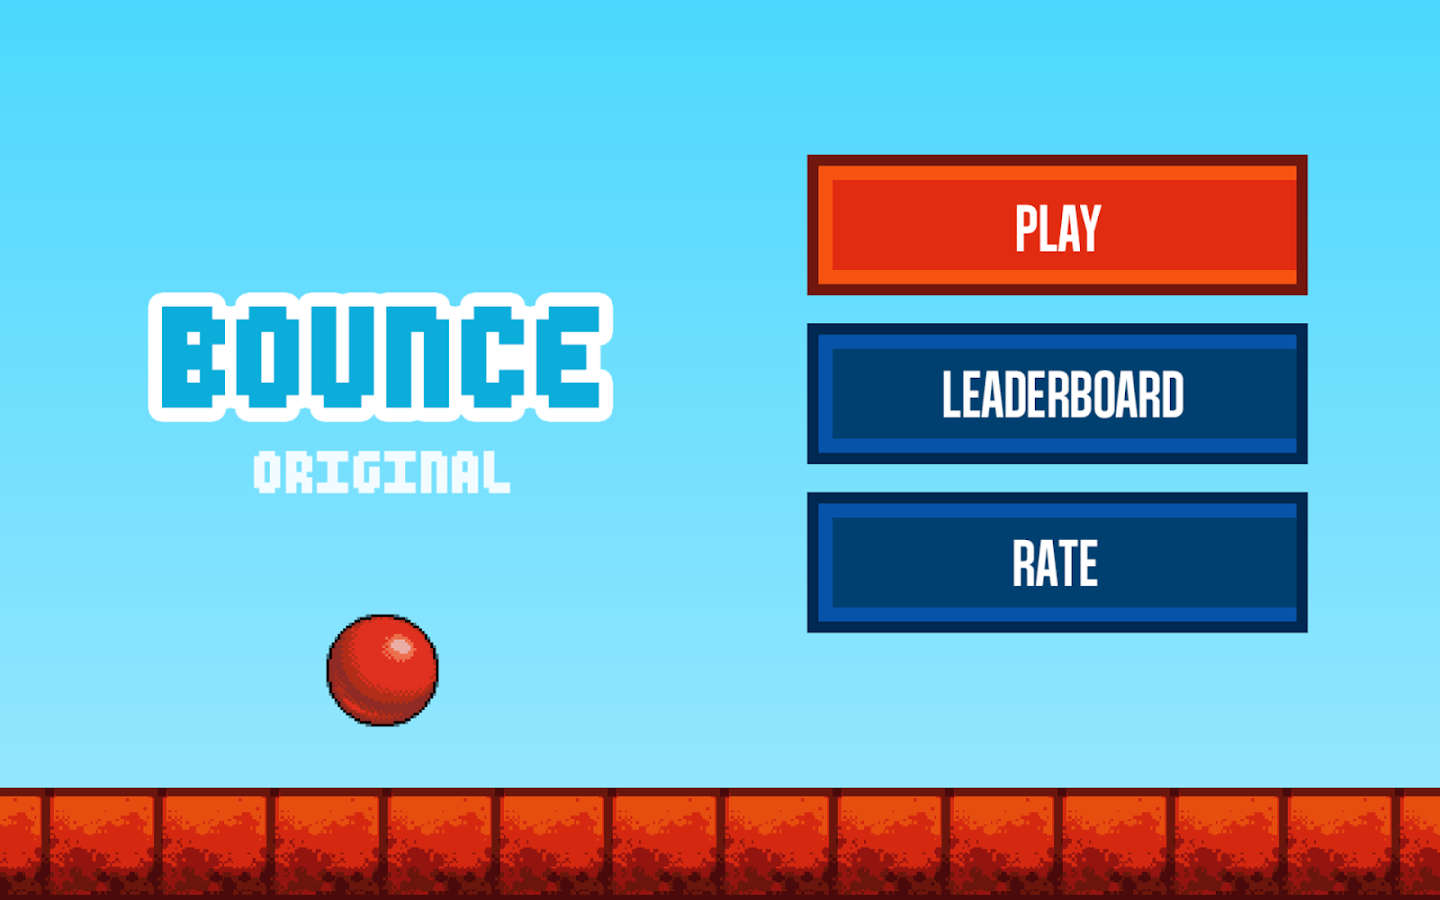 Bounce Original android games}